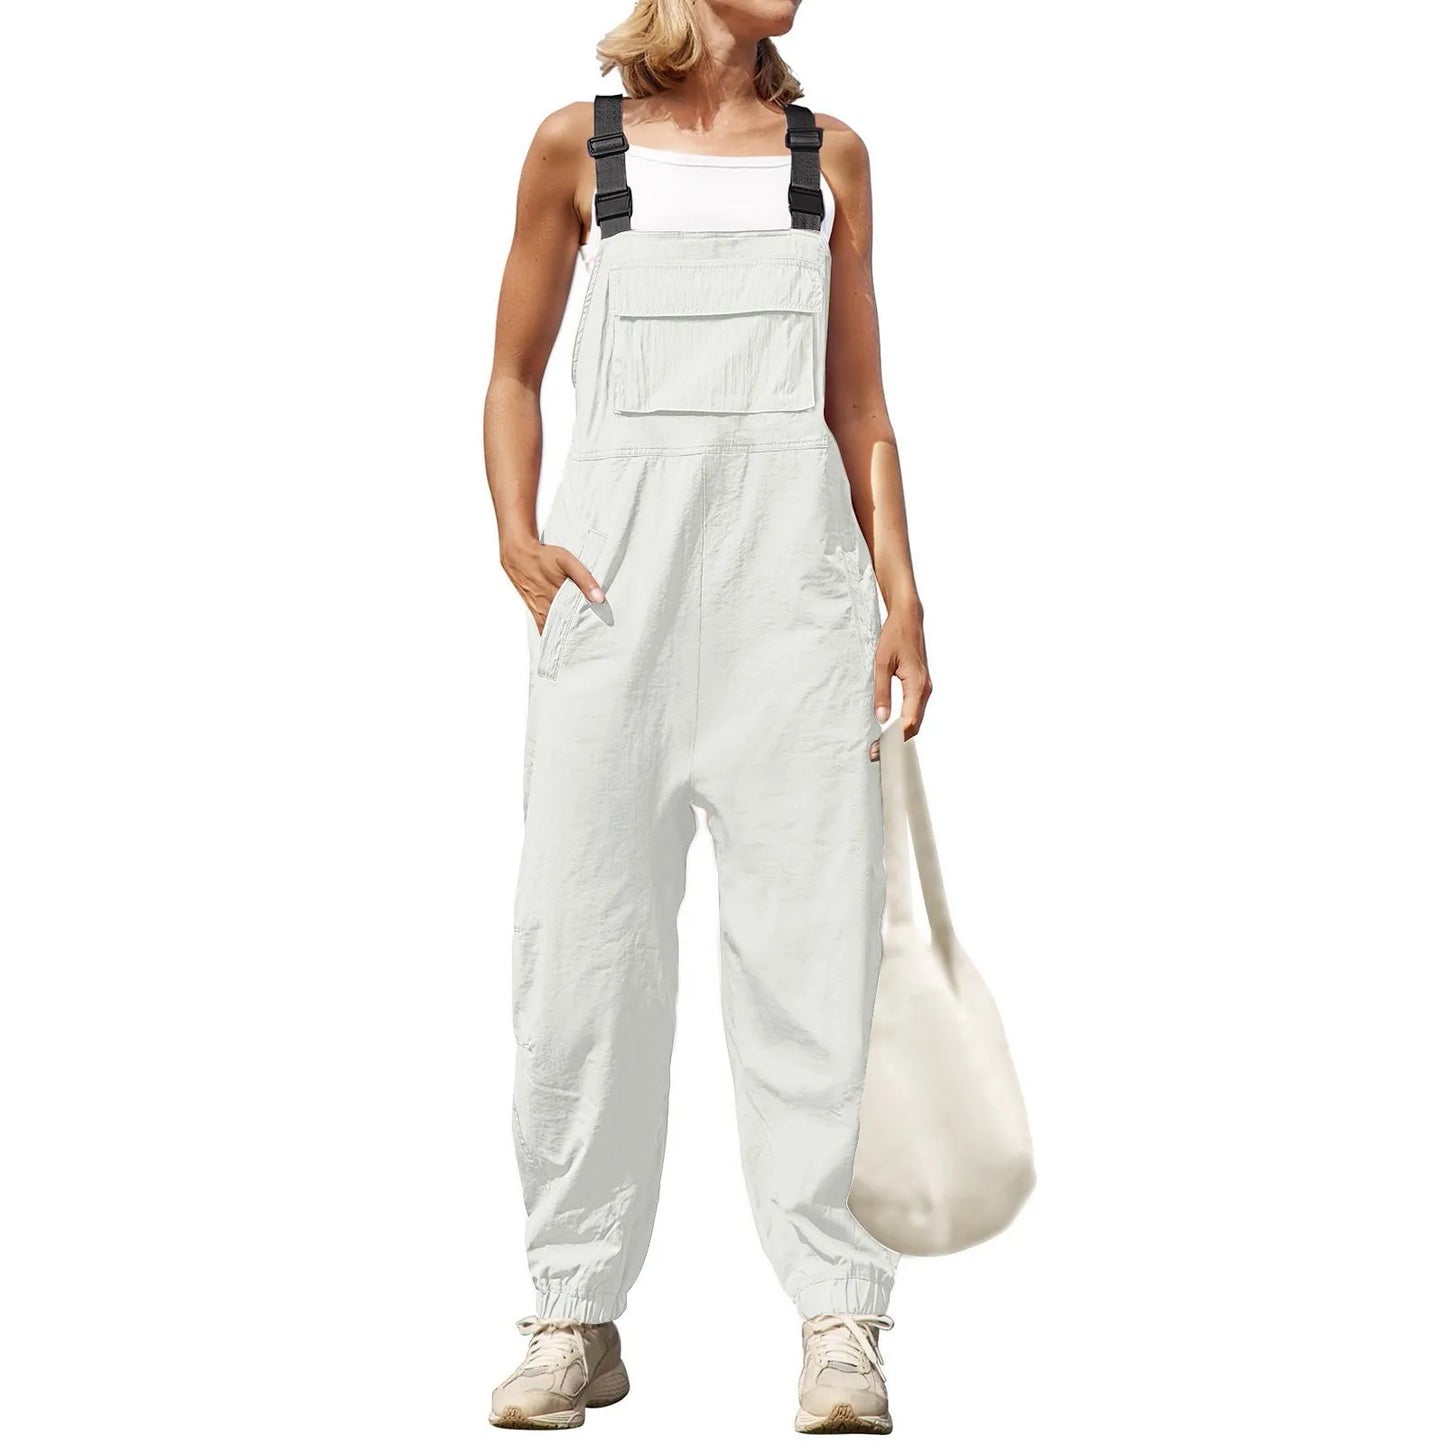 Jumpsuits- Women's Solid Bib Pencil Pantsuits with Multipockets - Baggy Overalls- Beige- Chuzko Women Clothing